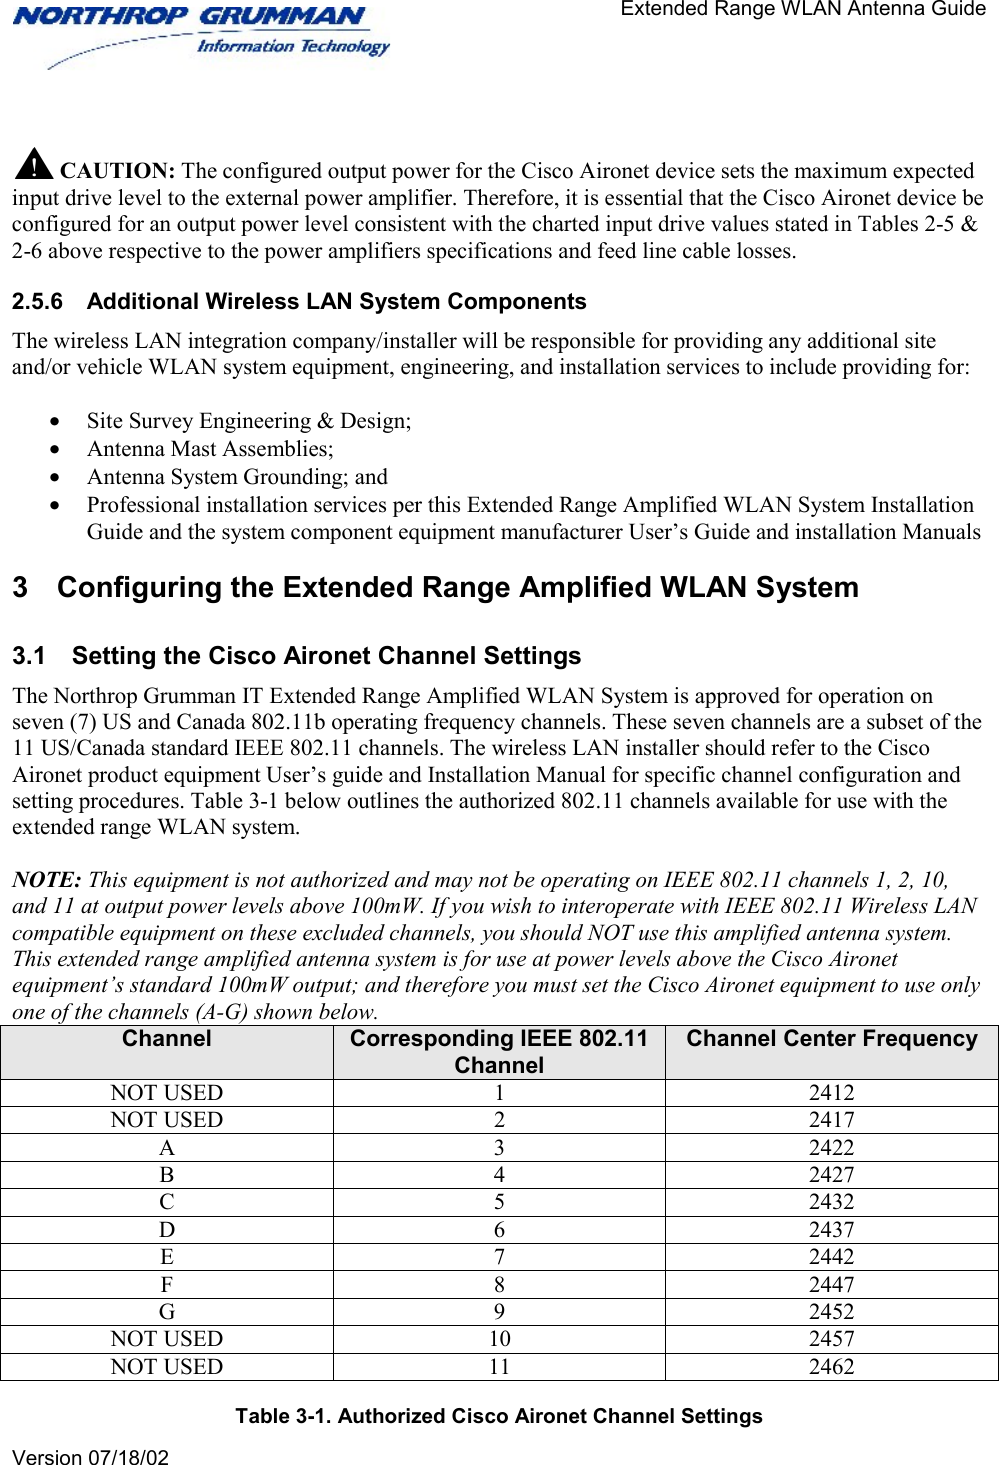                                       Extended Range WLAN Antenna Guide   Version 07/18/02     CAUTION: The configured output power for the Cisco Aironet device sets the maximum expected input drive level to the external power amplifier. Therefore, it is essential that the Cisco Aironet device be configured for an output power level consistent with the charted input drive values stated in Tables 2-5 &amp; 2-6 above respective to the power amplifiers specifications and feed line cable losses.  2.5.6  Additional Wireless LAN System Components The wireless LAN integration company/installer will be responsible for providing any additional site and/or vehicle WLAN system equipment, engineering, and installation services to include providing for:  •  Site Survey Engineering &amp; Design; •  Antenna Mast Assemblies; •  Antenna System Grounding; and •  Professional installation services per this Extended Range Amplified WLAN System Installation Guide and the system component equipment manufacturer User’s Guide and installation Manuals 3  Configuring the Extended Range Amplified WLAN System 3.1  Setting the Cisco Aironet Channel Settings The Northrop Grumman IT Extended Range Amplified WLAN System is approved for operation on seven (7) US and Canada 802.11b operating frequency channels. These seven channels are a subset of the 11 US/Canada standard IEEE 802.11 channels. The wireless LAN installer should refer to the Cisco Aironet product equipment User’s guide and Installation Manual for specific channel configuration and setting procedures. Table 3-1 below outlines the authorized 802.11 channels available for use with the extended range WLAN system.  NOTE: This equipment is not authorized and may not be operating on IEEE 802.11 channels 1, 2, 10, and 11 at output power levels above 100mW. If you wish to interoperate with IEEE 802.11 Wireless LAN compatible equipment on these excluded channels, you should NOT use this amplified antenna system. This extended range amplified antenna system is for use at power levels above the Cisco Aironet equipment’s standard 100mW output; and therefore you must set the Cisco Aironet equipment to use only one of the channels (A-G) shown below. Channel  Corresponding IEEE 802.11 Channel Channel Center Frequency NOT USED  1  2412 NOT USED  2  2417 A 3 2422 B 4 2427 C 5 2432 D 6 2437 E 7 2442 F 8 2447 G 9 2452 NOT USED  10  2457 NOT USED  11  2462  Table 3-1. Authorized Cisco Aironet Channel Settings 